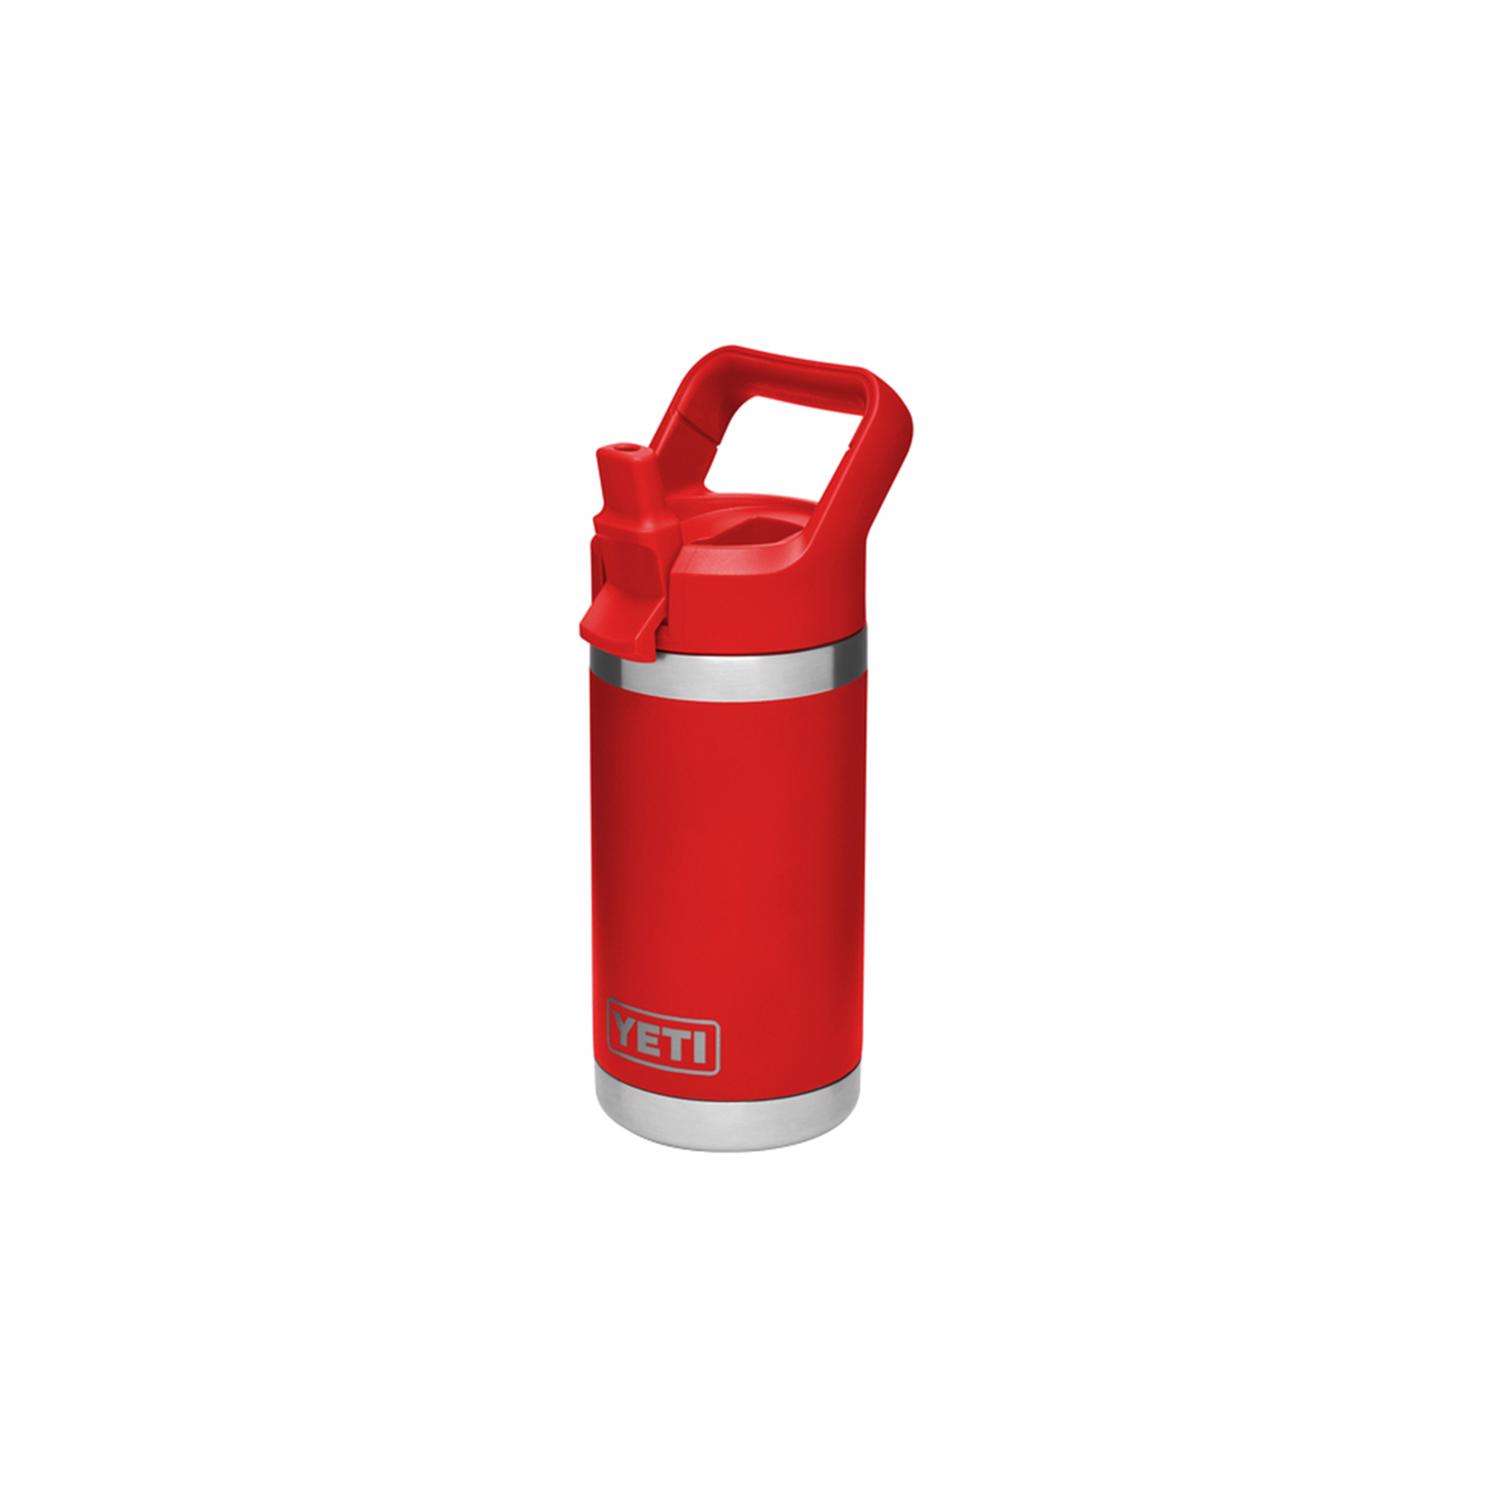 YETI Rambler 4 oz Cup 2 Pack - Rescue Red